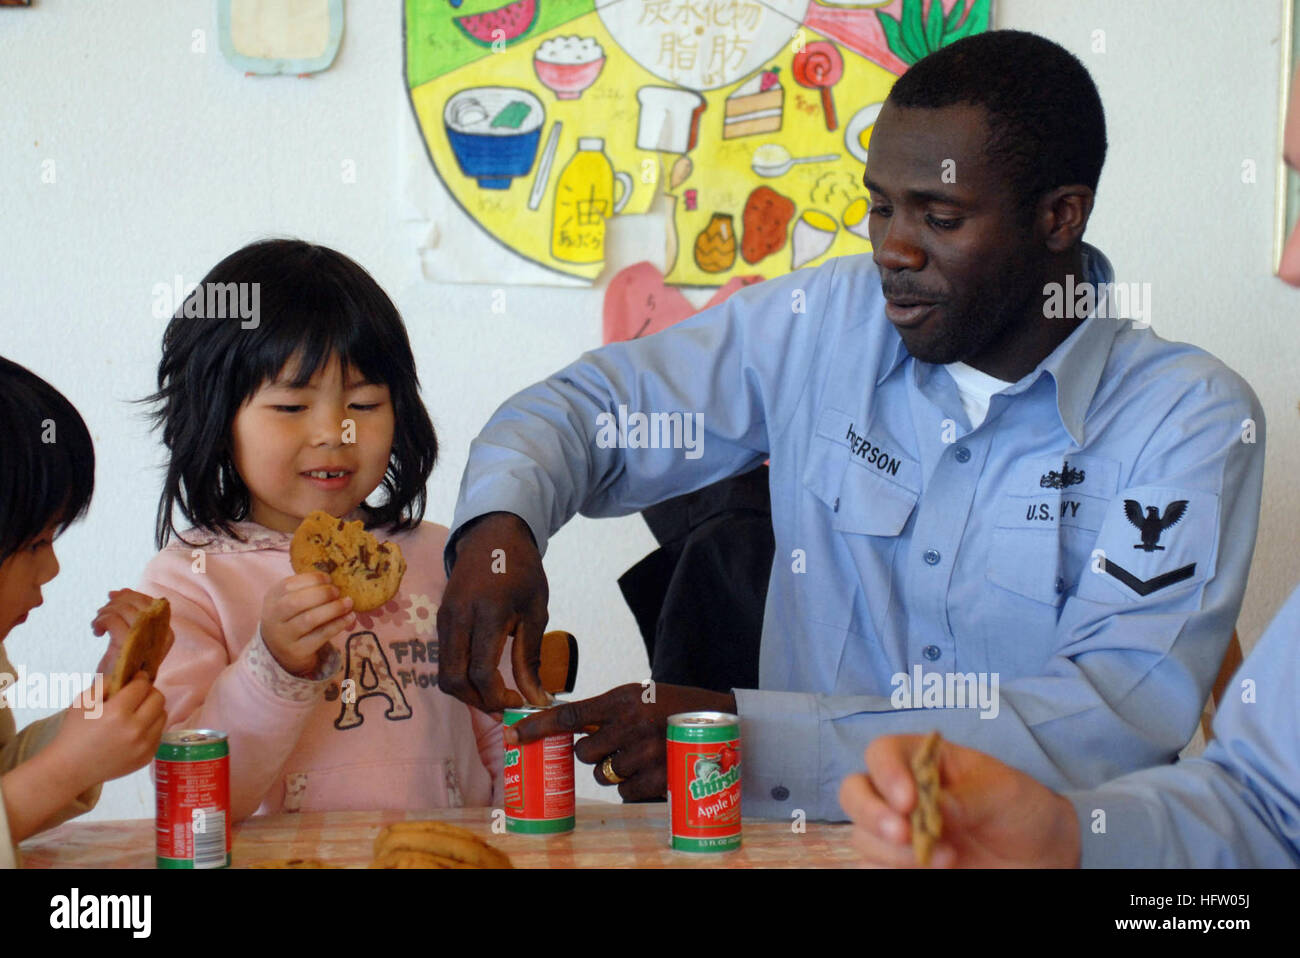 090301-N-2610F-007 FUKUOKA, Japan (March 1, 2009) Boatswain's Mate 3rd Class Barn Henderson, from Chicago, opens a can of apple juice for a child in the Kodomono-Ie Children's Home during a community service project. Sailors from the Arleigh Burke-class guided missile destroyer USS Preble (DDG 88) volunteered to spend time during their port visit to Japan with children separated from their parents. Preble, part of the John C. Stennis Carrier Strike Group, is on a scheduled six-month deployment to the western Pacific Ocean. (U.S. Navy photo by Mass Communication Specialist 2nd Elliott Fabrizio/ Stock Photo